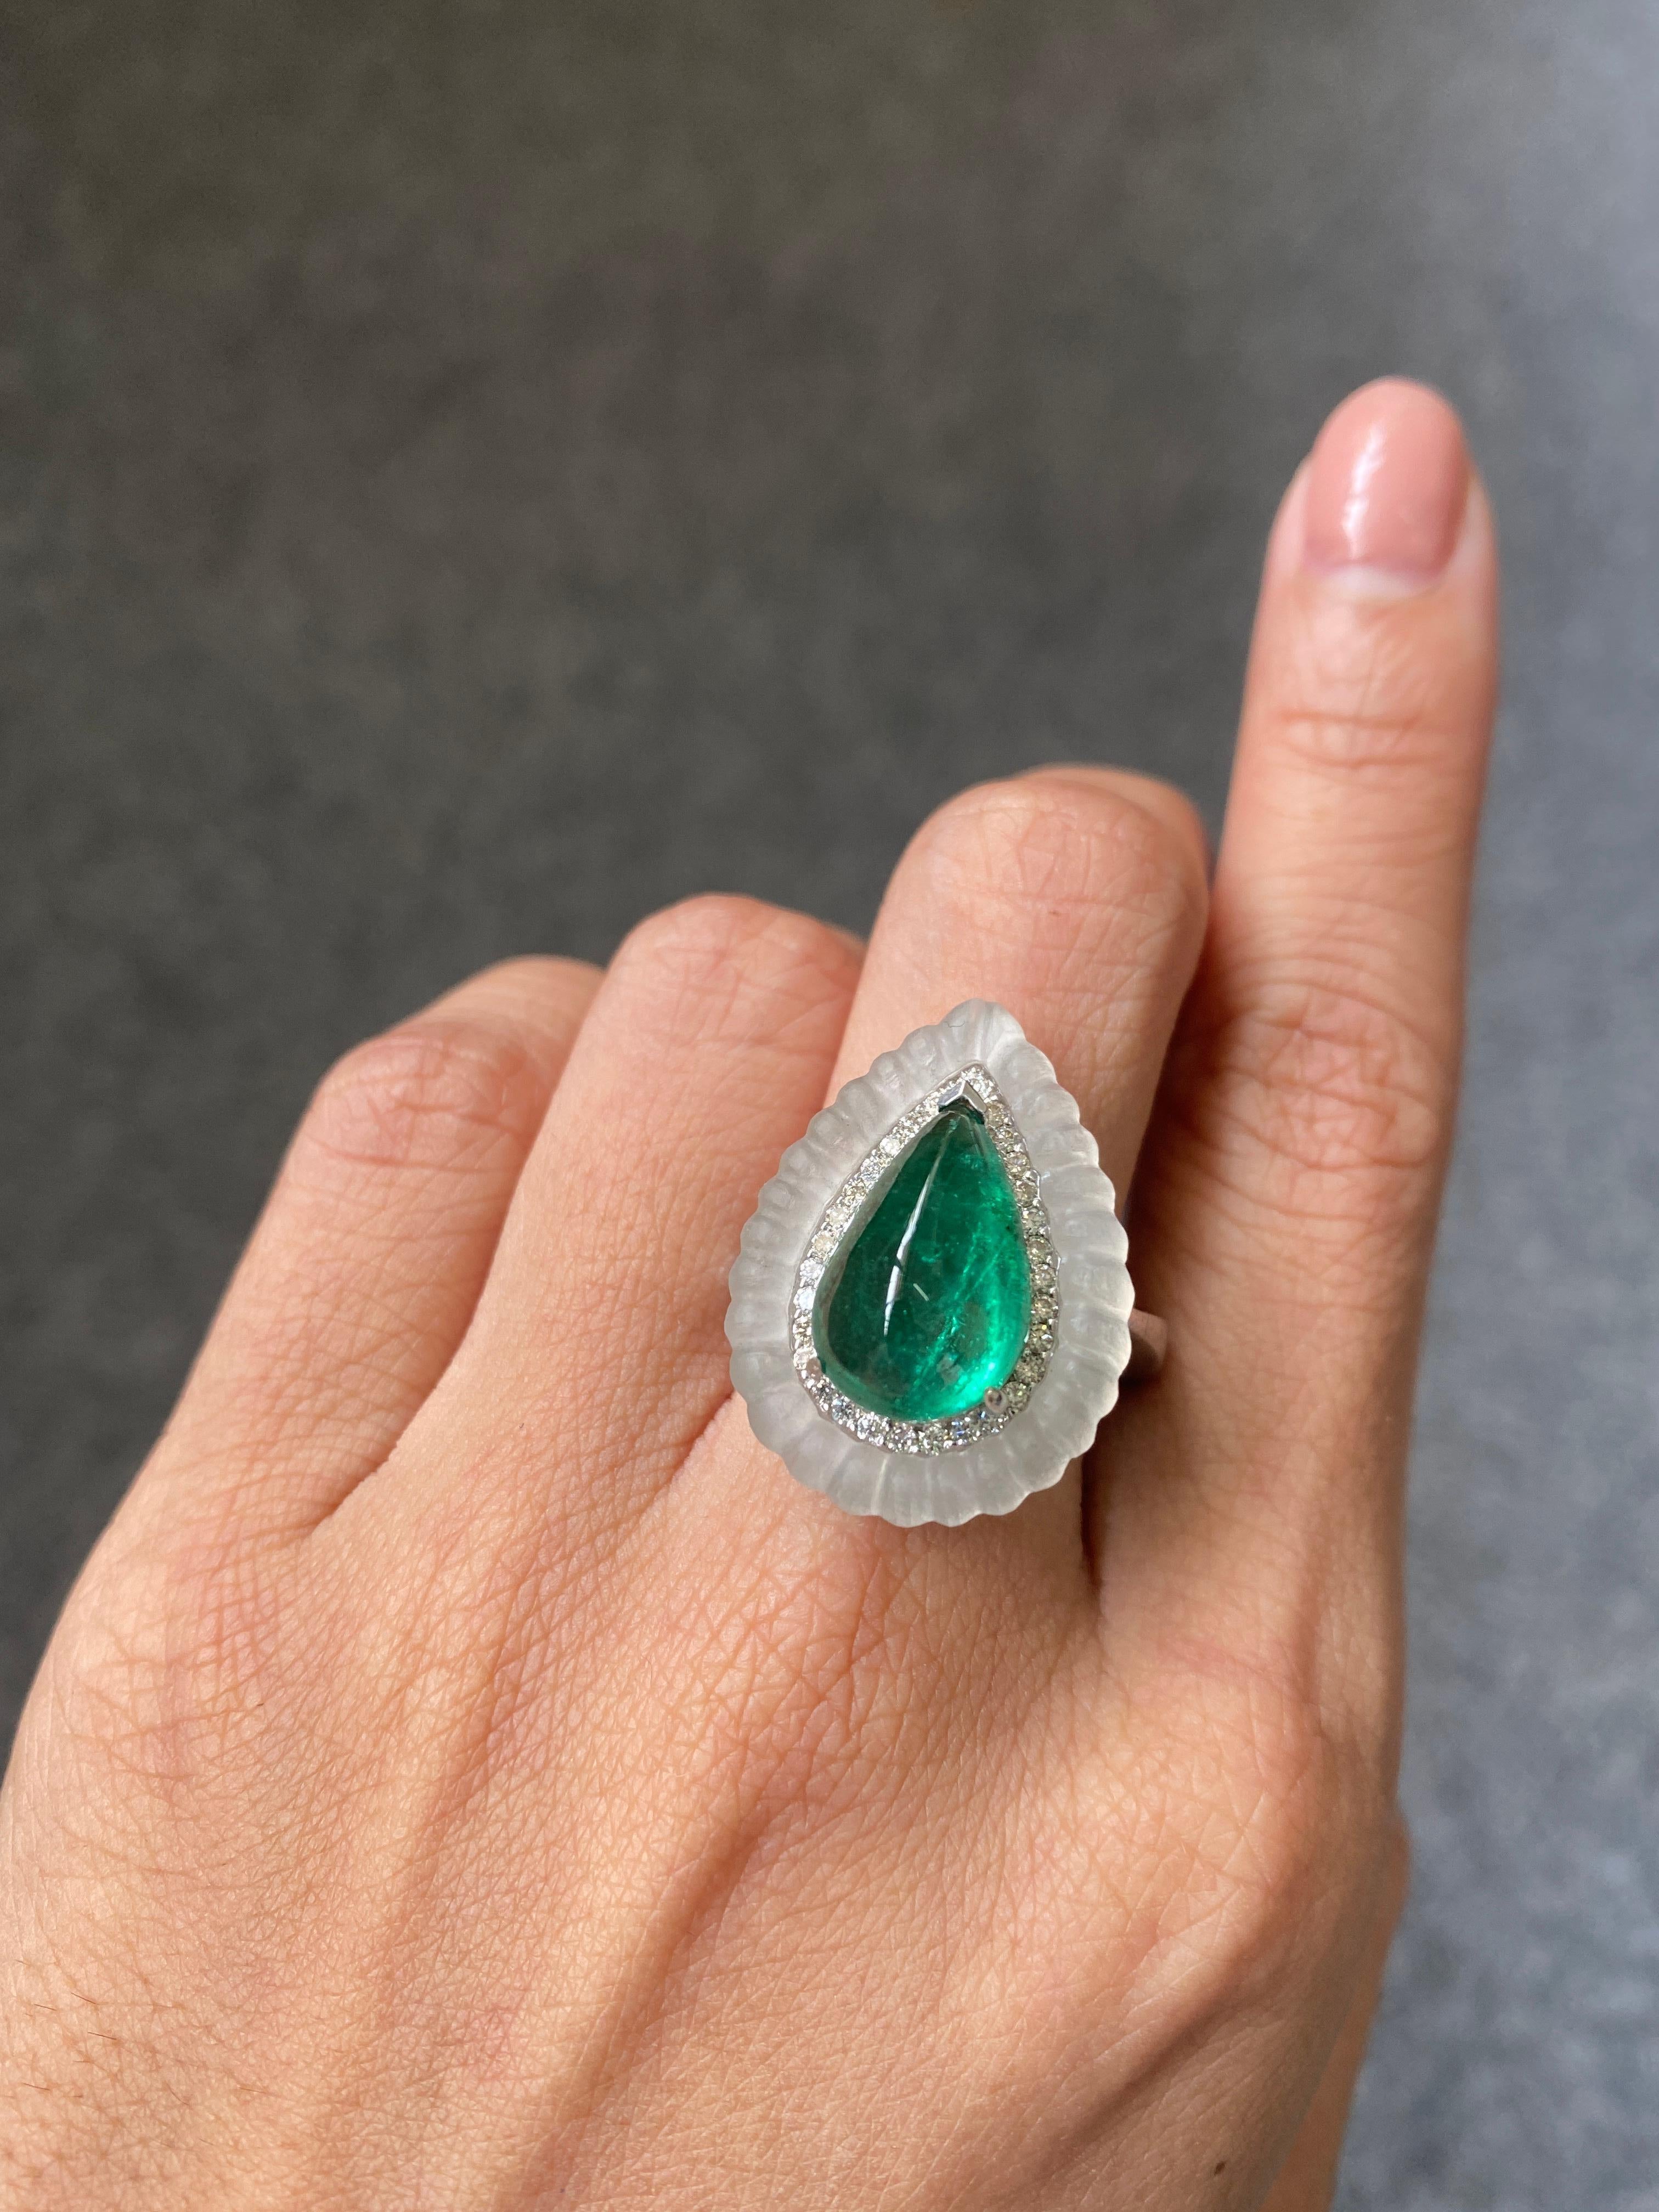 5.15 Carat Pear Shape Cabochon Emerald Art Deco Style Ring For Sale 1